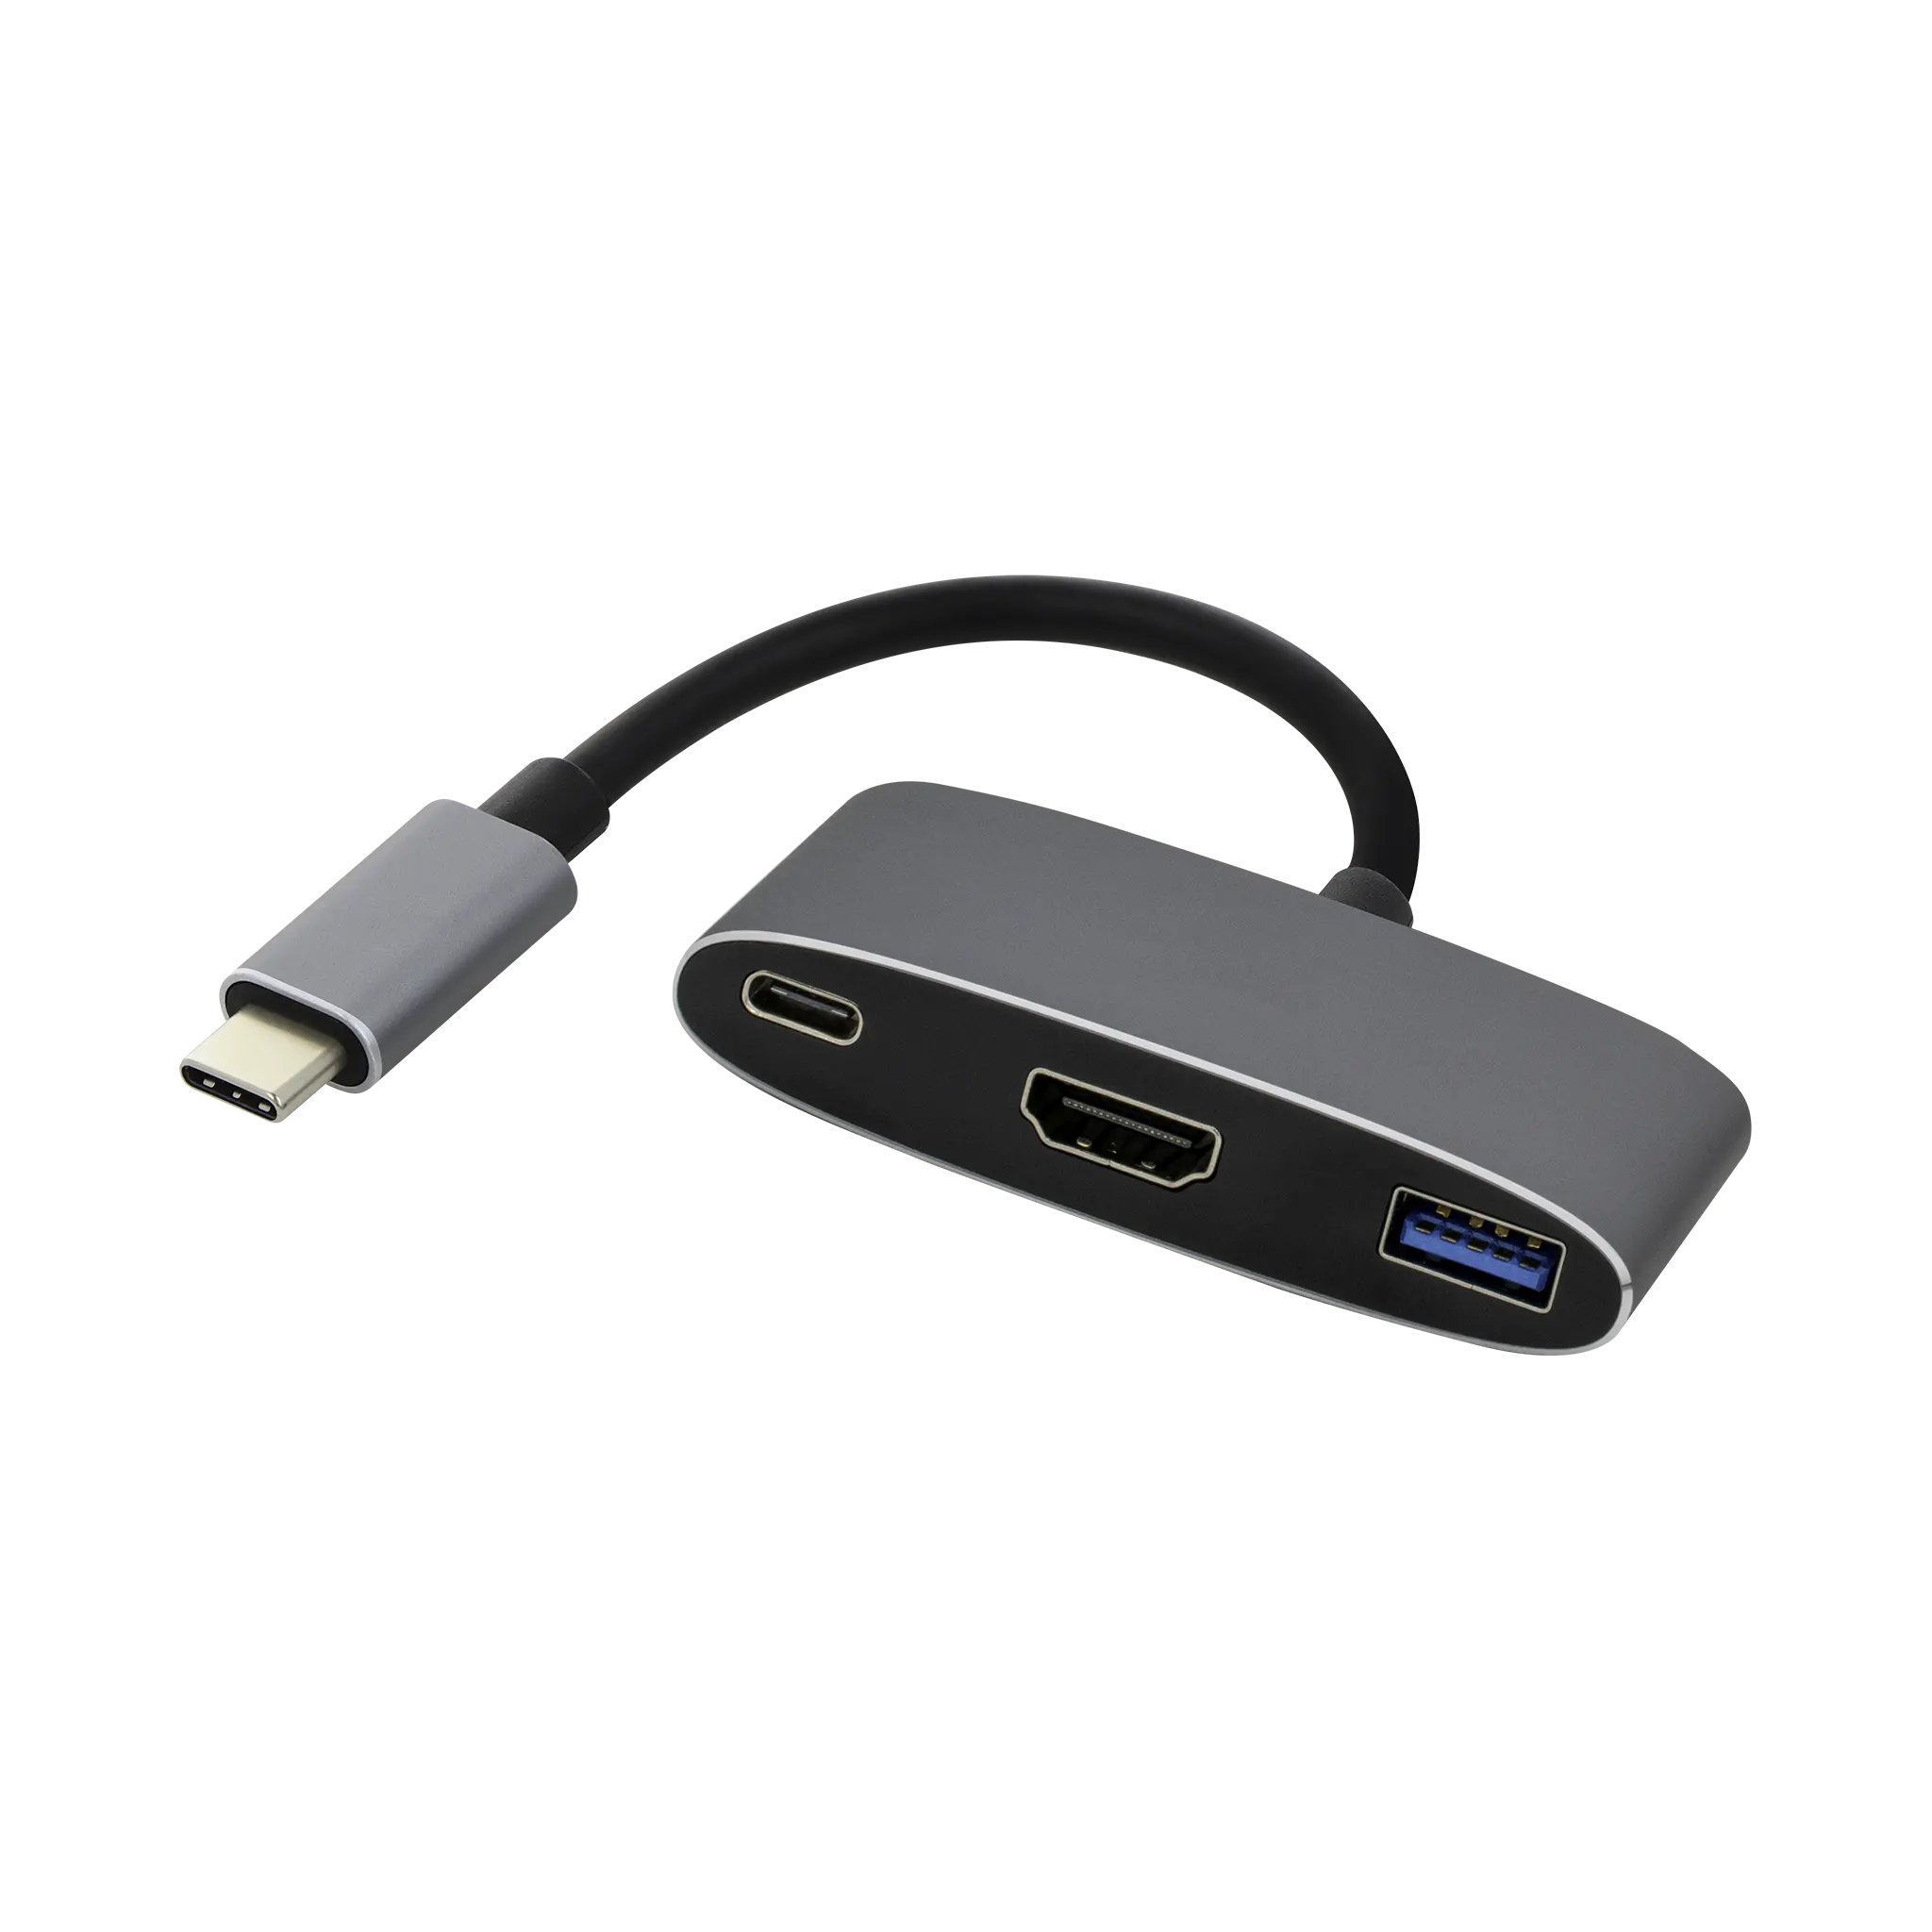 USB-C to HDMI Adapter, Adapters and Accessories, Charge and utility